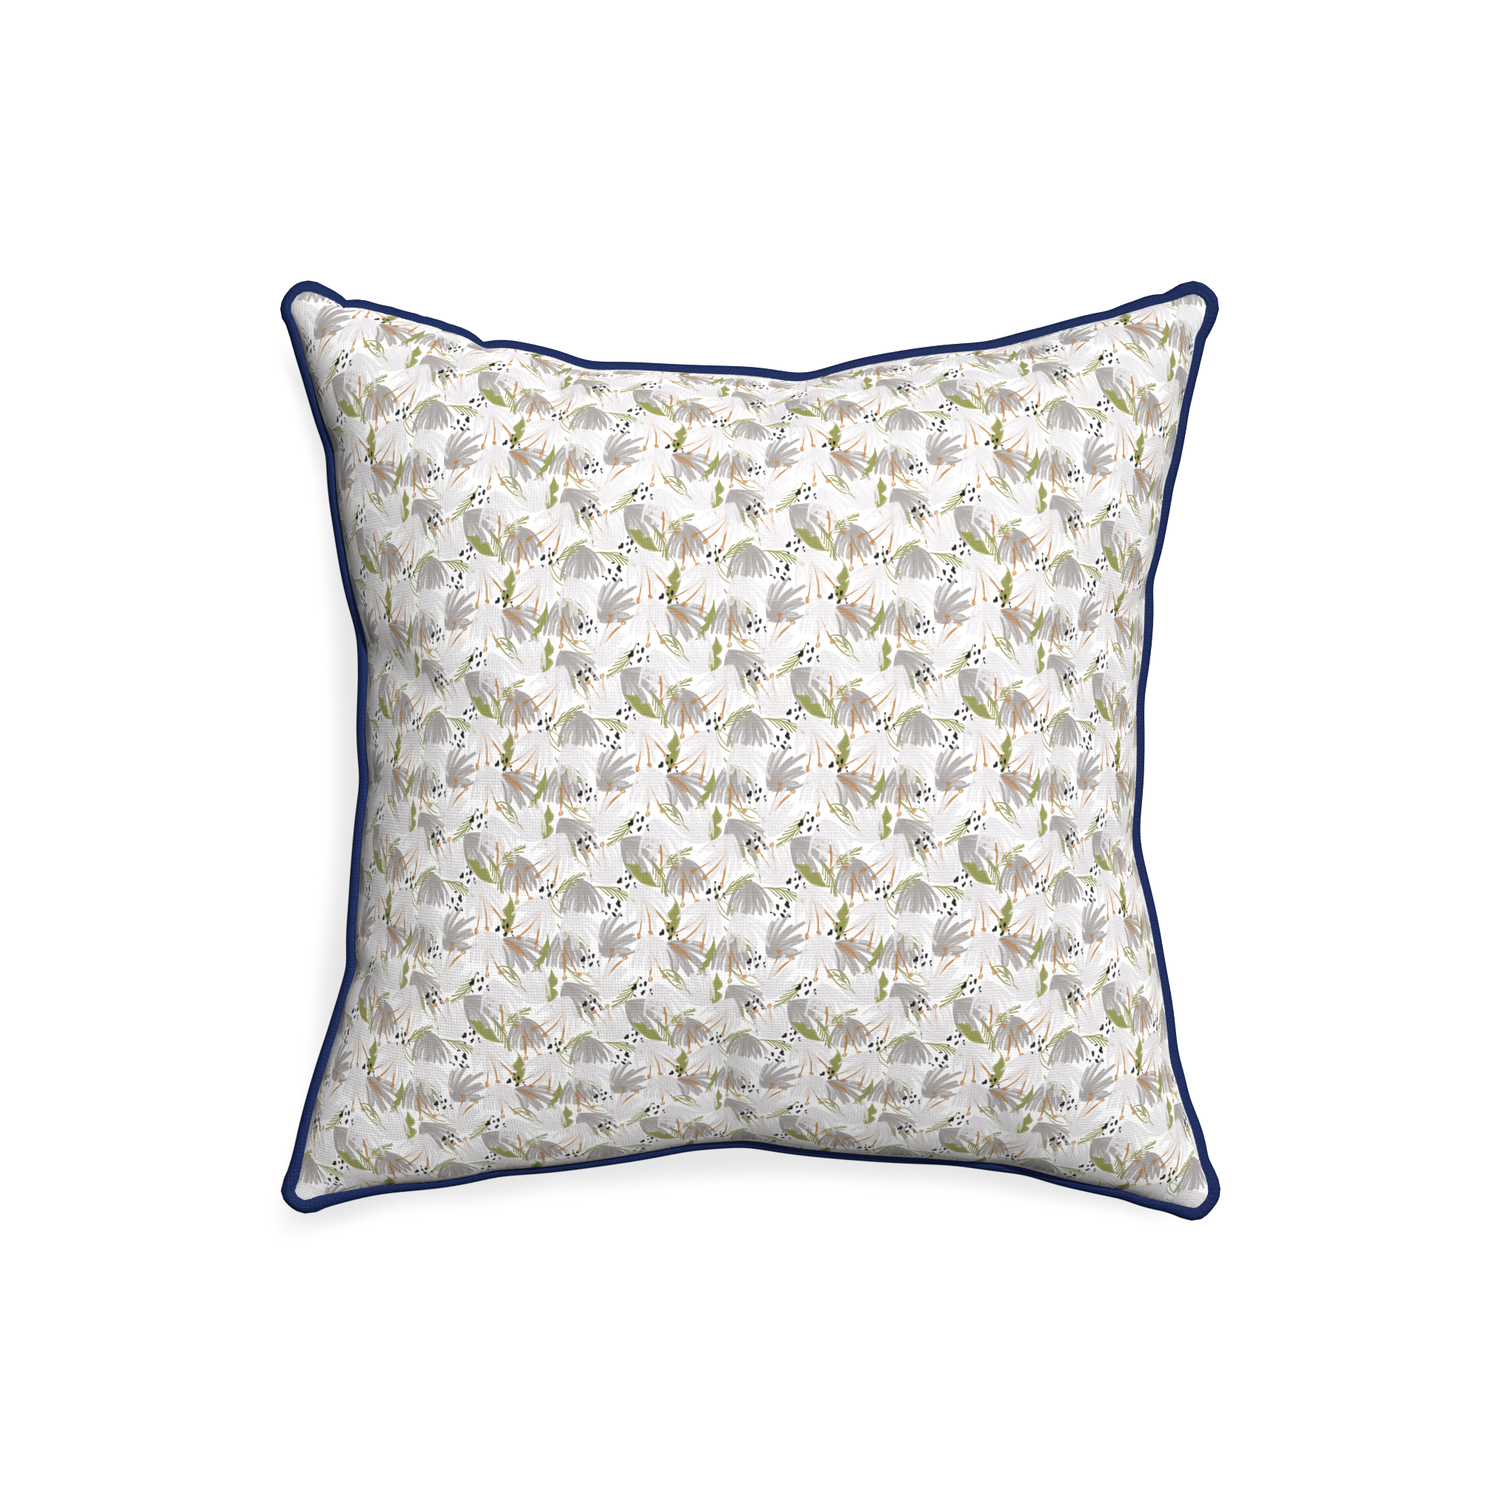 20-square eden grey custom pillow with midnight piping on white background